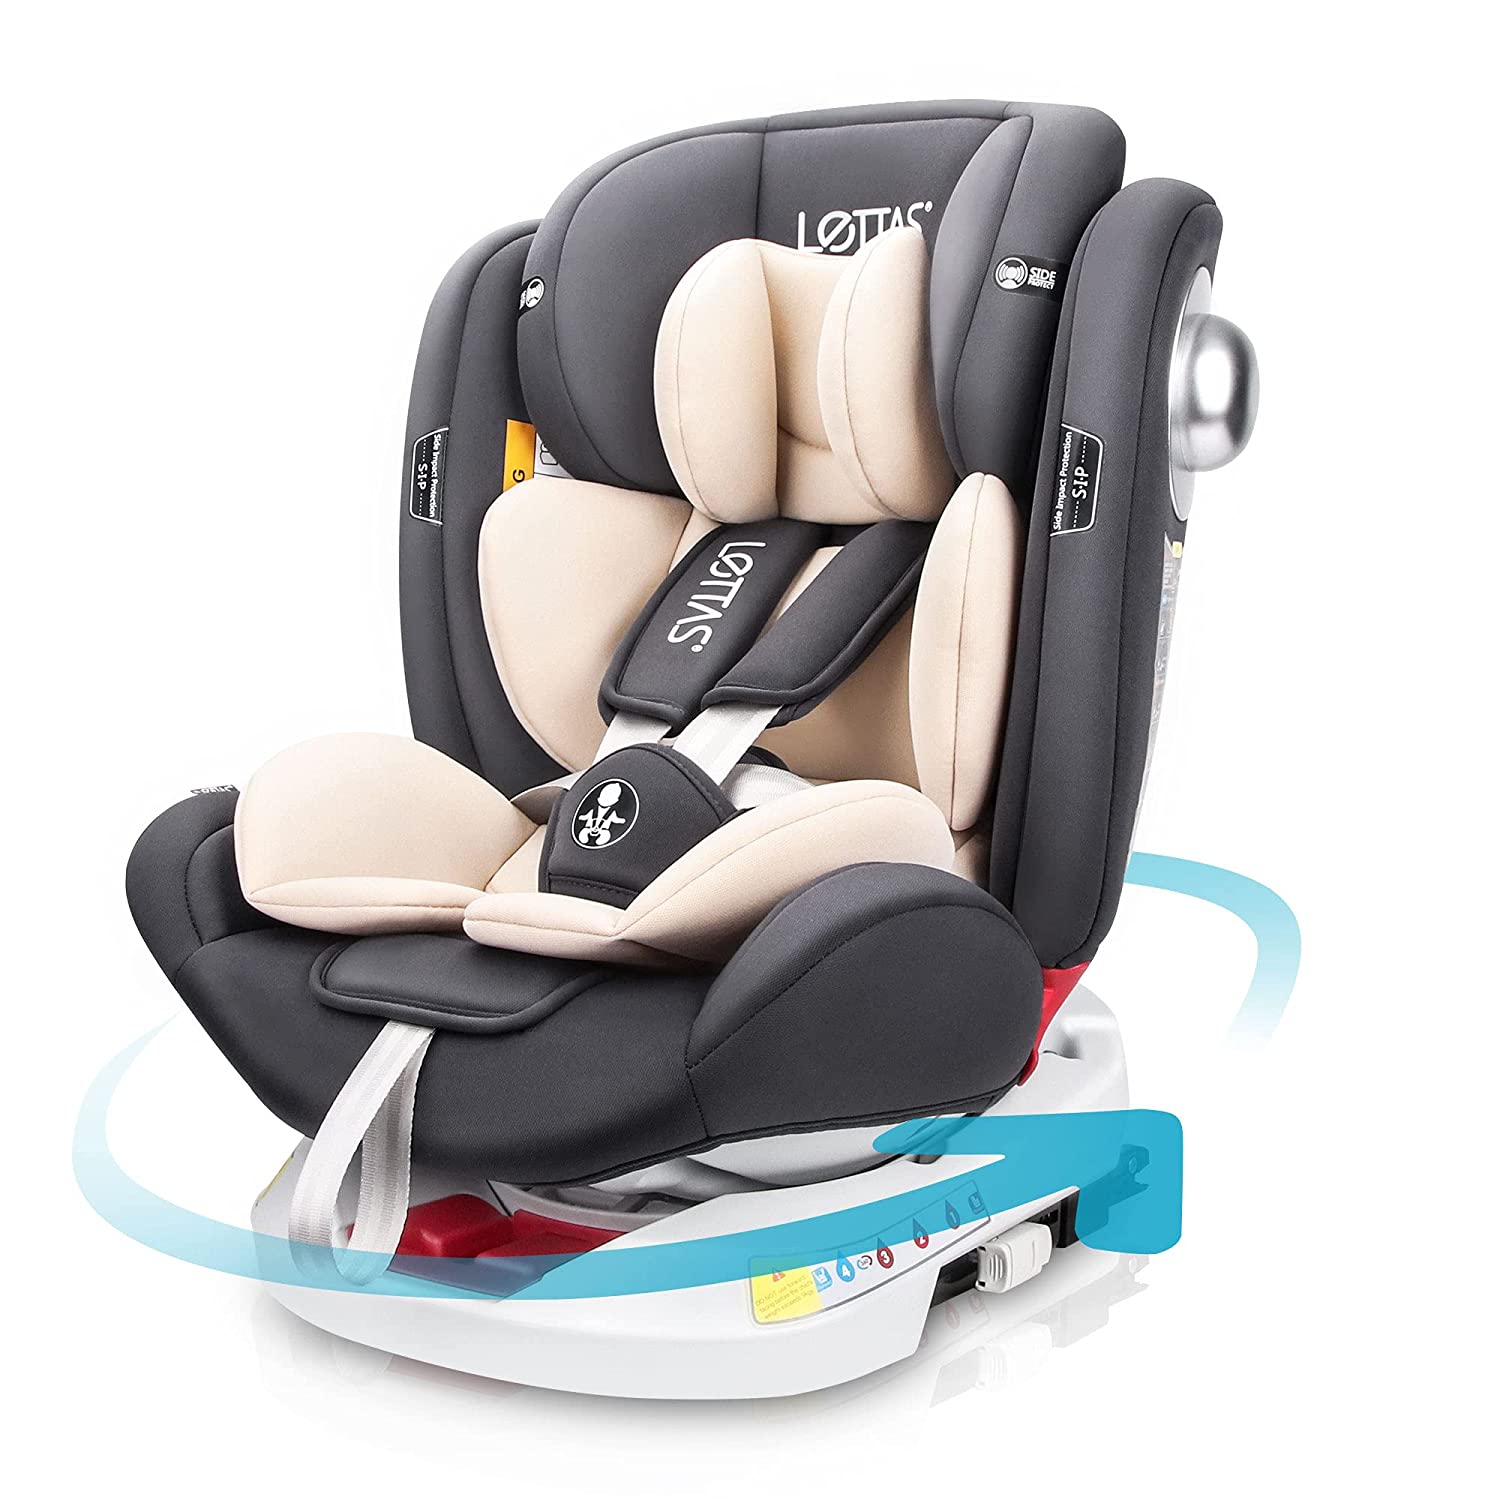 LETTAS Baby Car Seat 360° Rotatable Group 0+1/2/3 (0-36 kg/0-12 Years) with Protectors Side Isofix Top Tether ECE R44/04 (Grey)